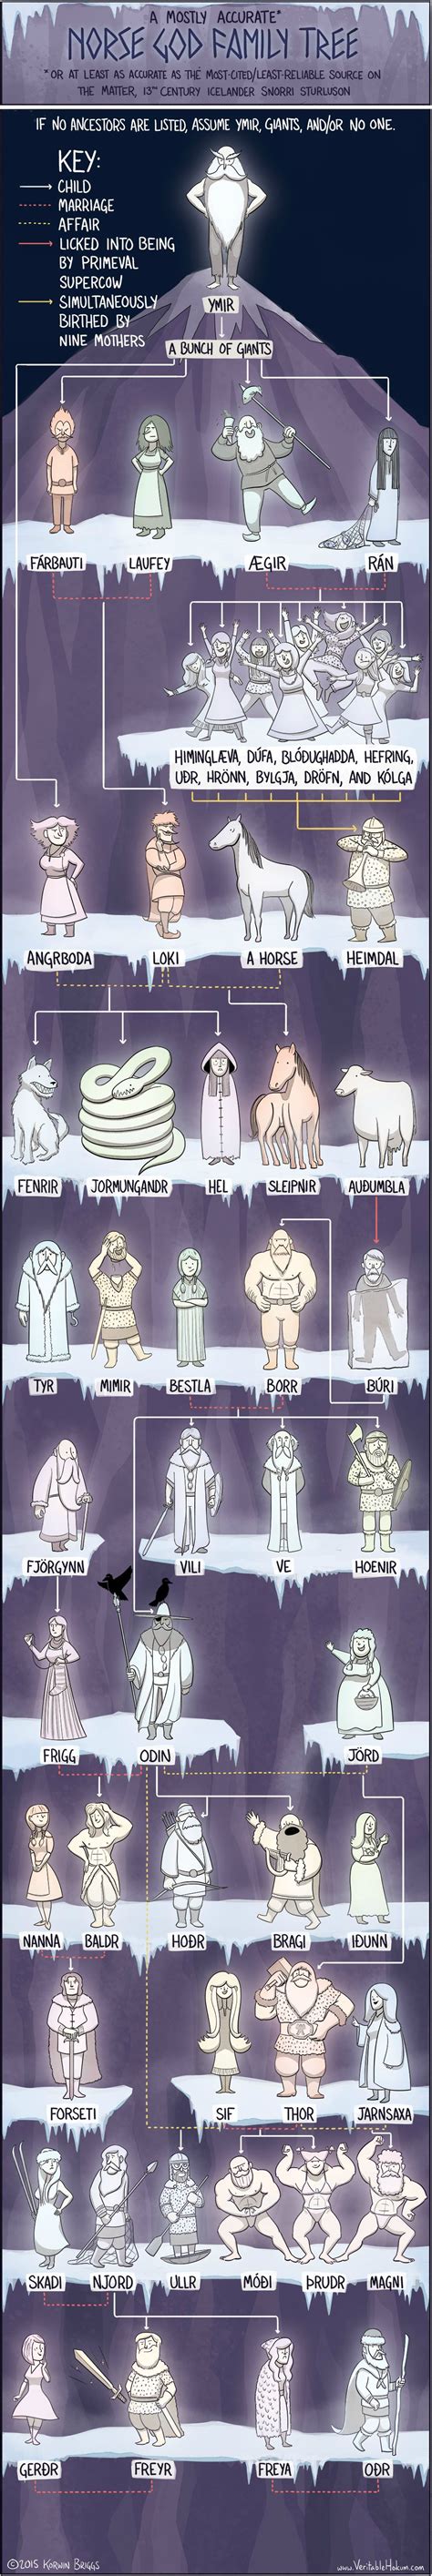 accurate norse god family tree infographic